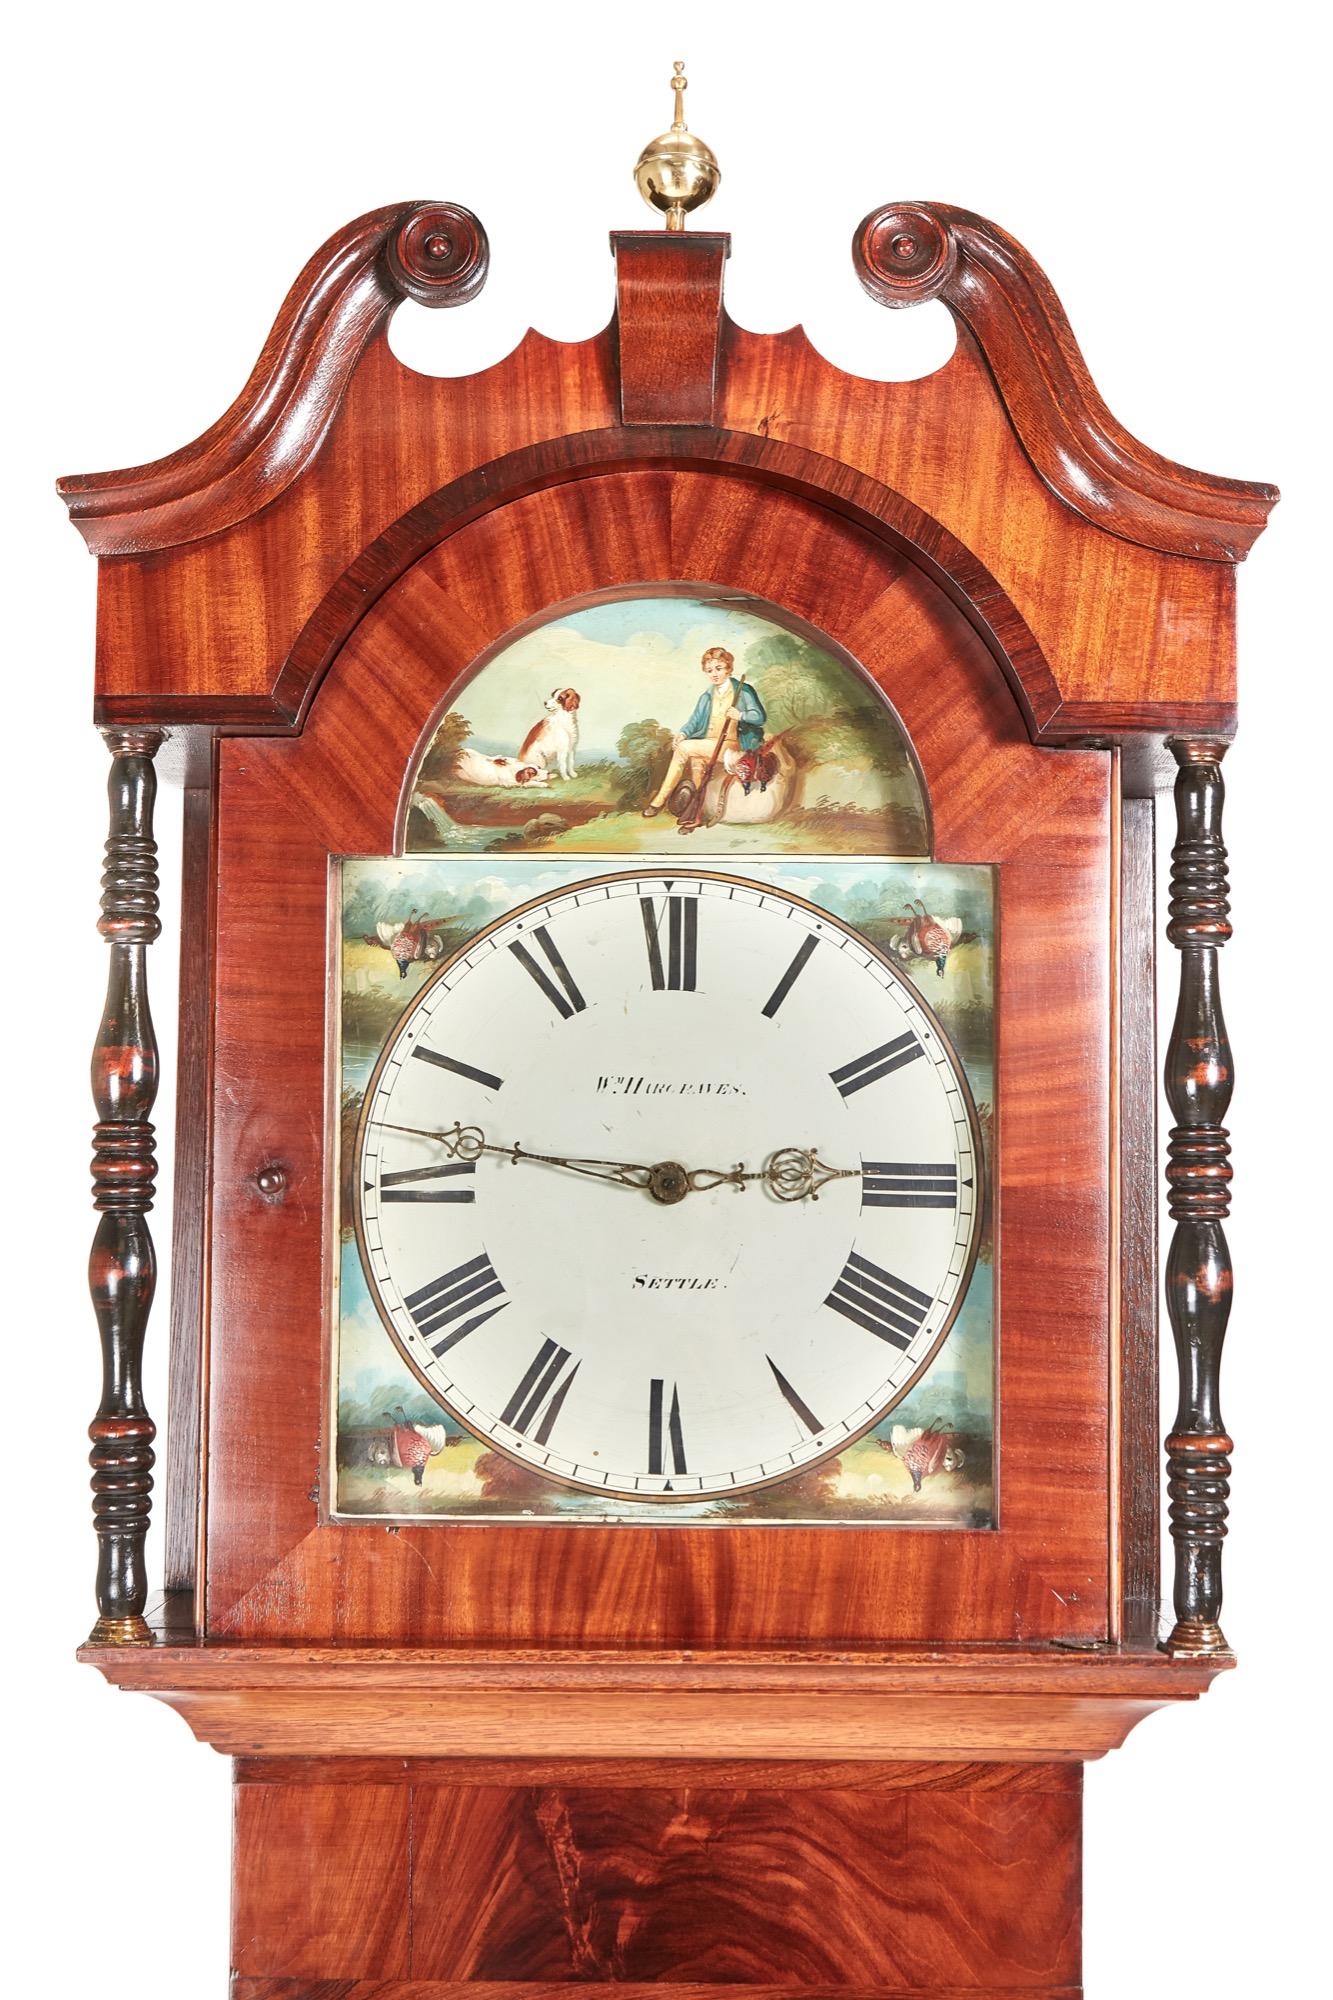 Antique mahogany and oak grandfather clock by WM Hargravers, with a swan-neck pediment, lovely decorative arced painted dial, 30 hour movement striking the hour on a bell, lovely mahogany and oak case, standing on original shaped bracket